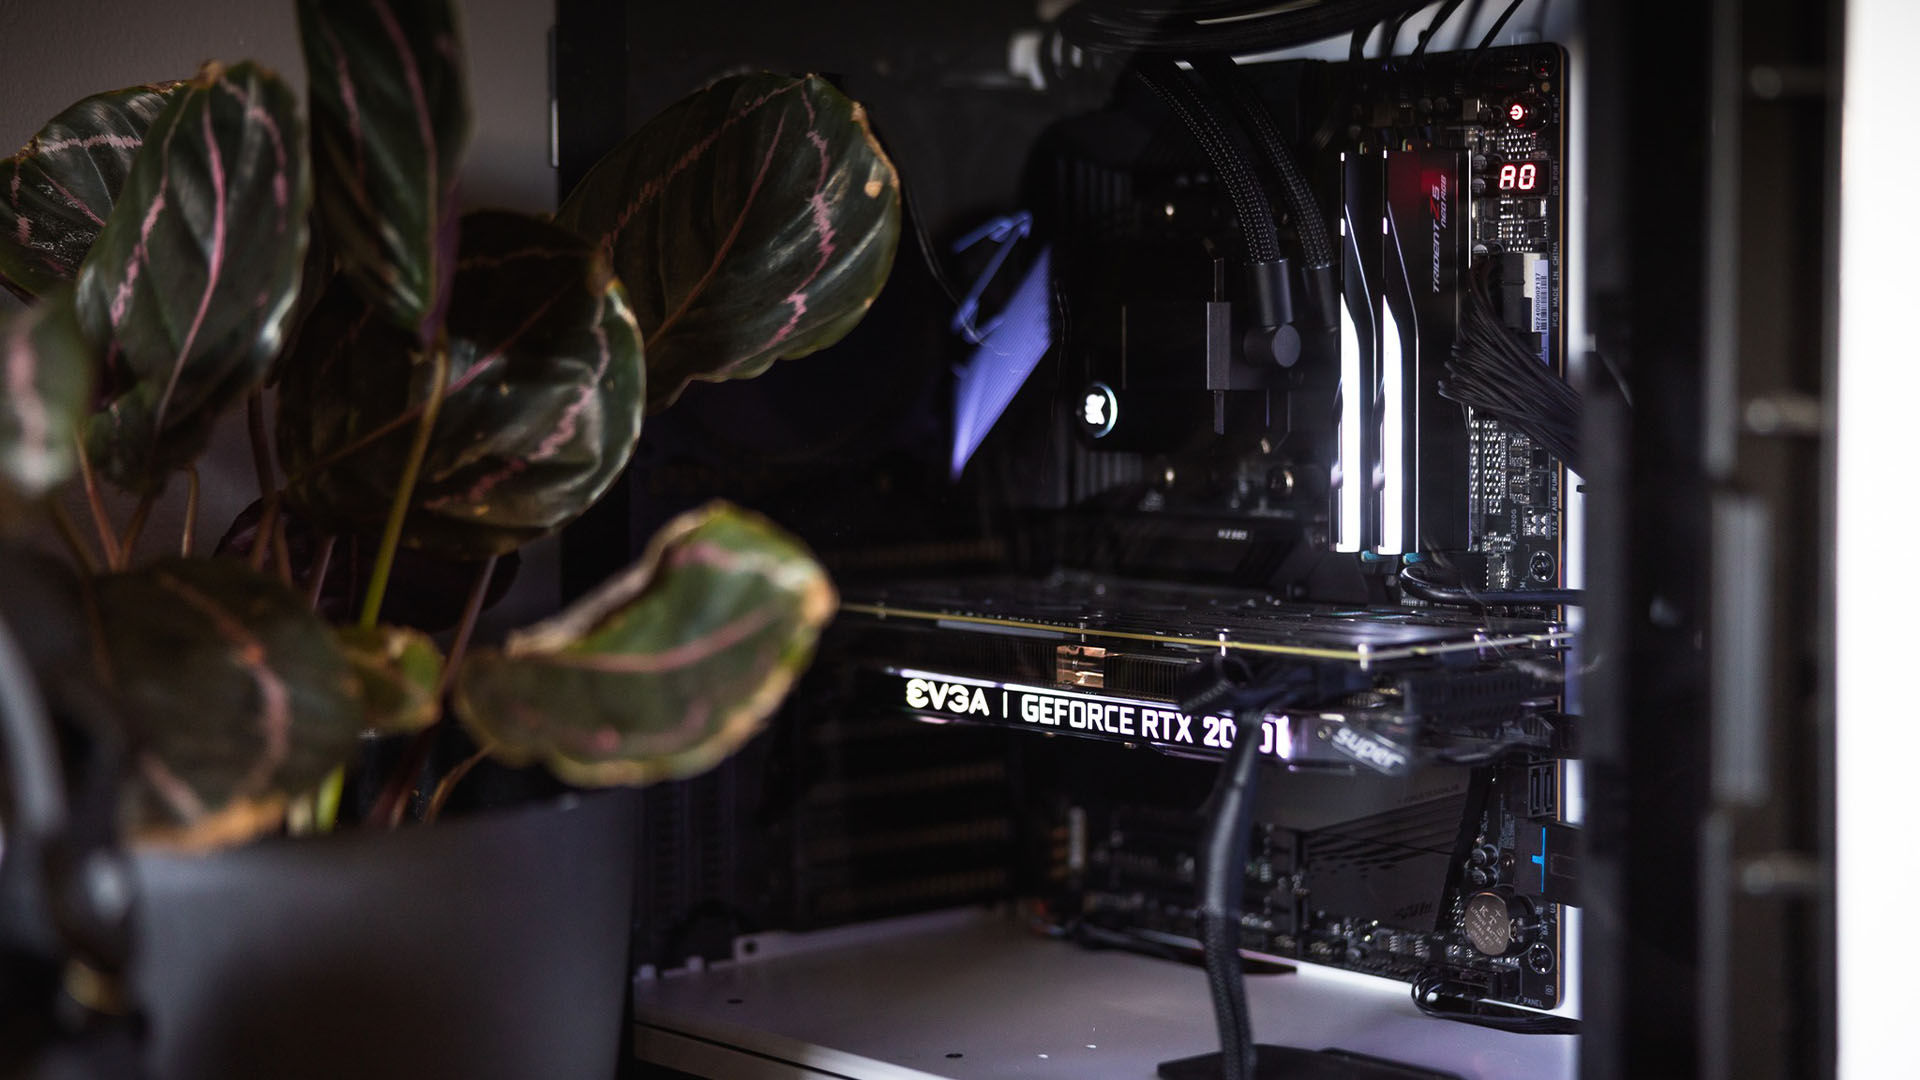 A gaming PC with an EVGA 2070 Super card next to a plant